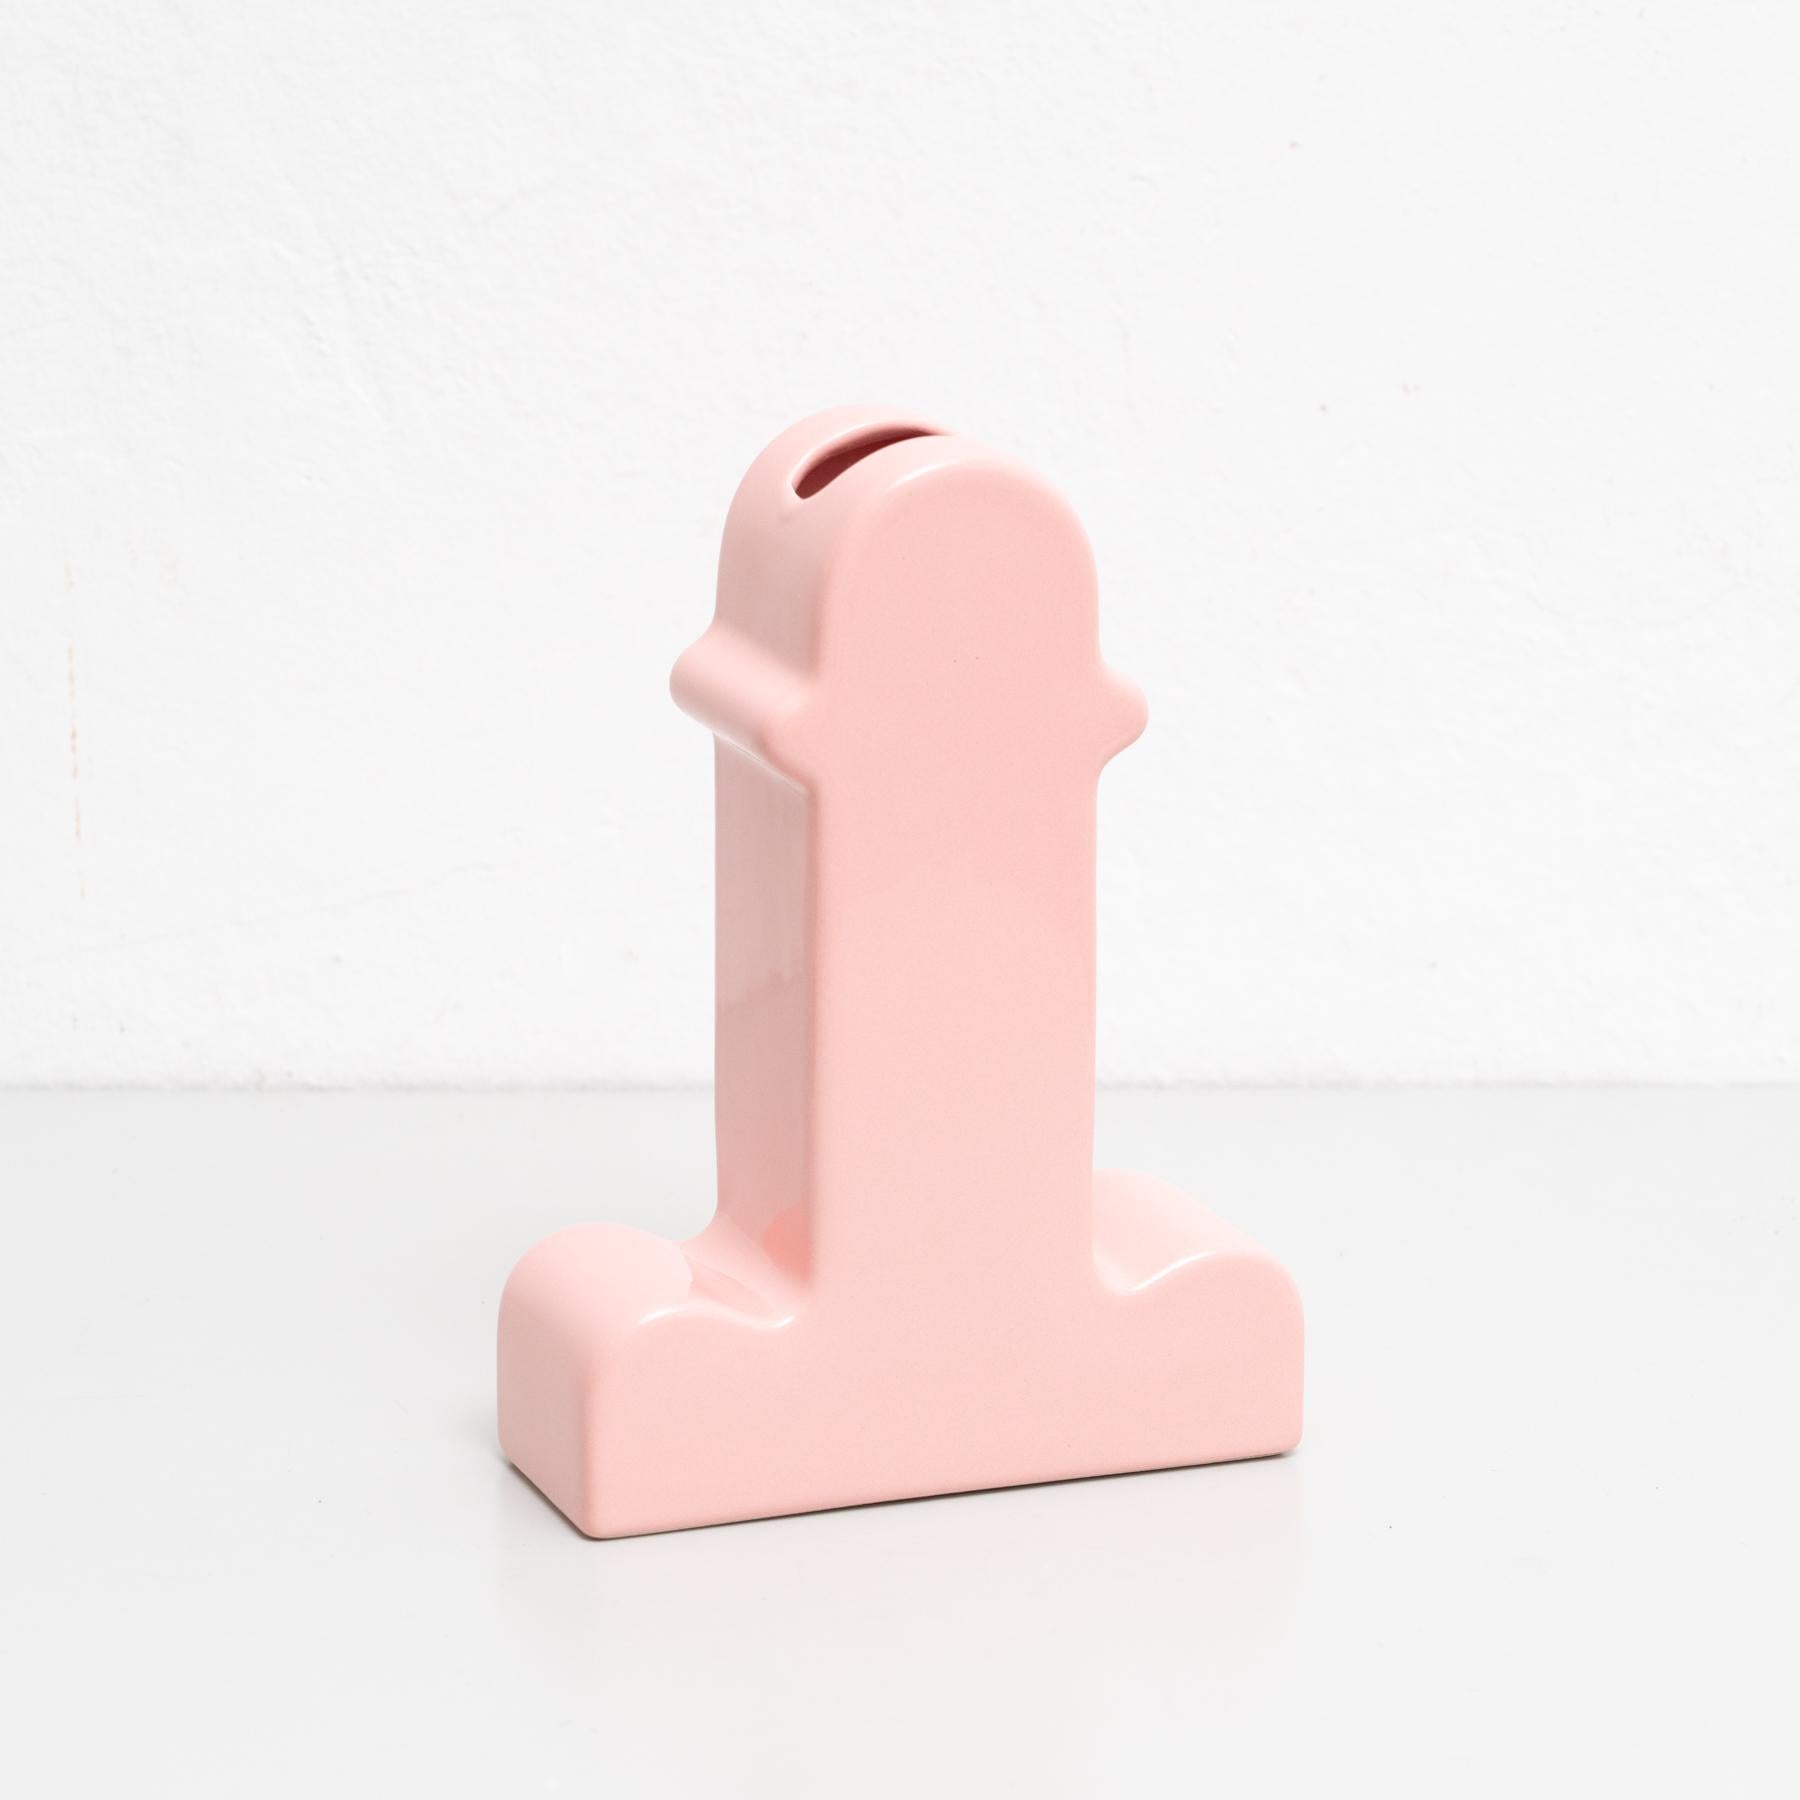 Shiva ceramic flower vase designed by Ettore Sottsass, circa 1973, edited by BD in Barcelona.

In good original condition with minor wear consistent with age and use preserving a beautiful patina.
 
In 2005, two years before Sottsass’ death, a